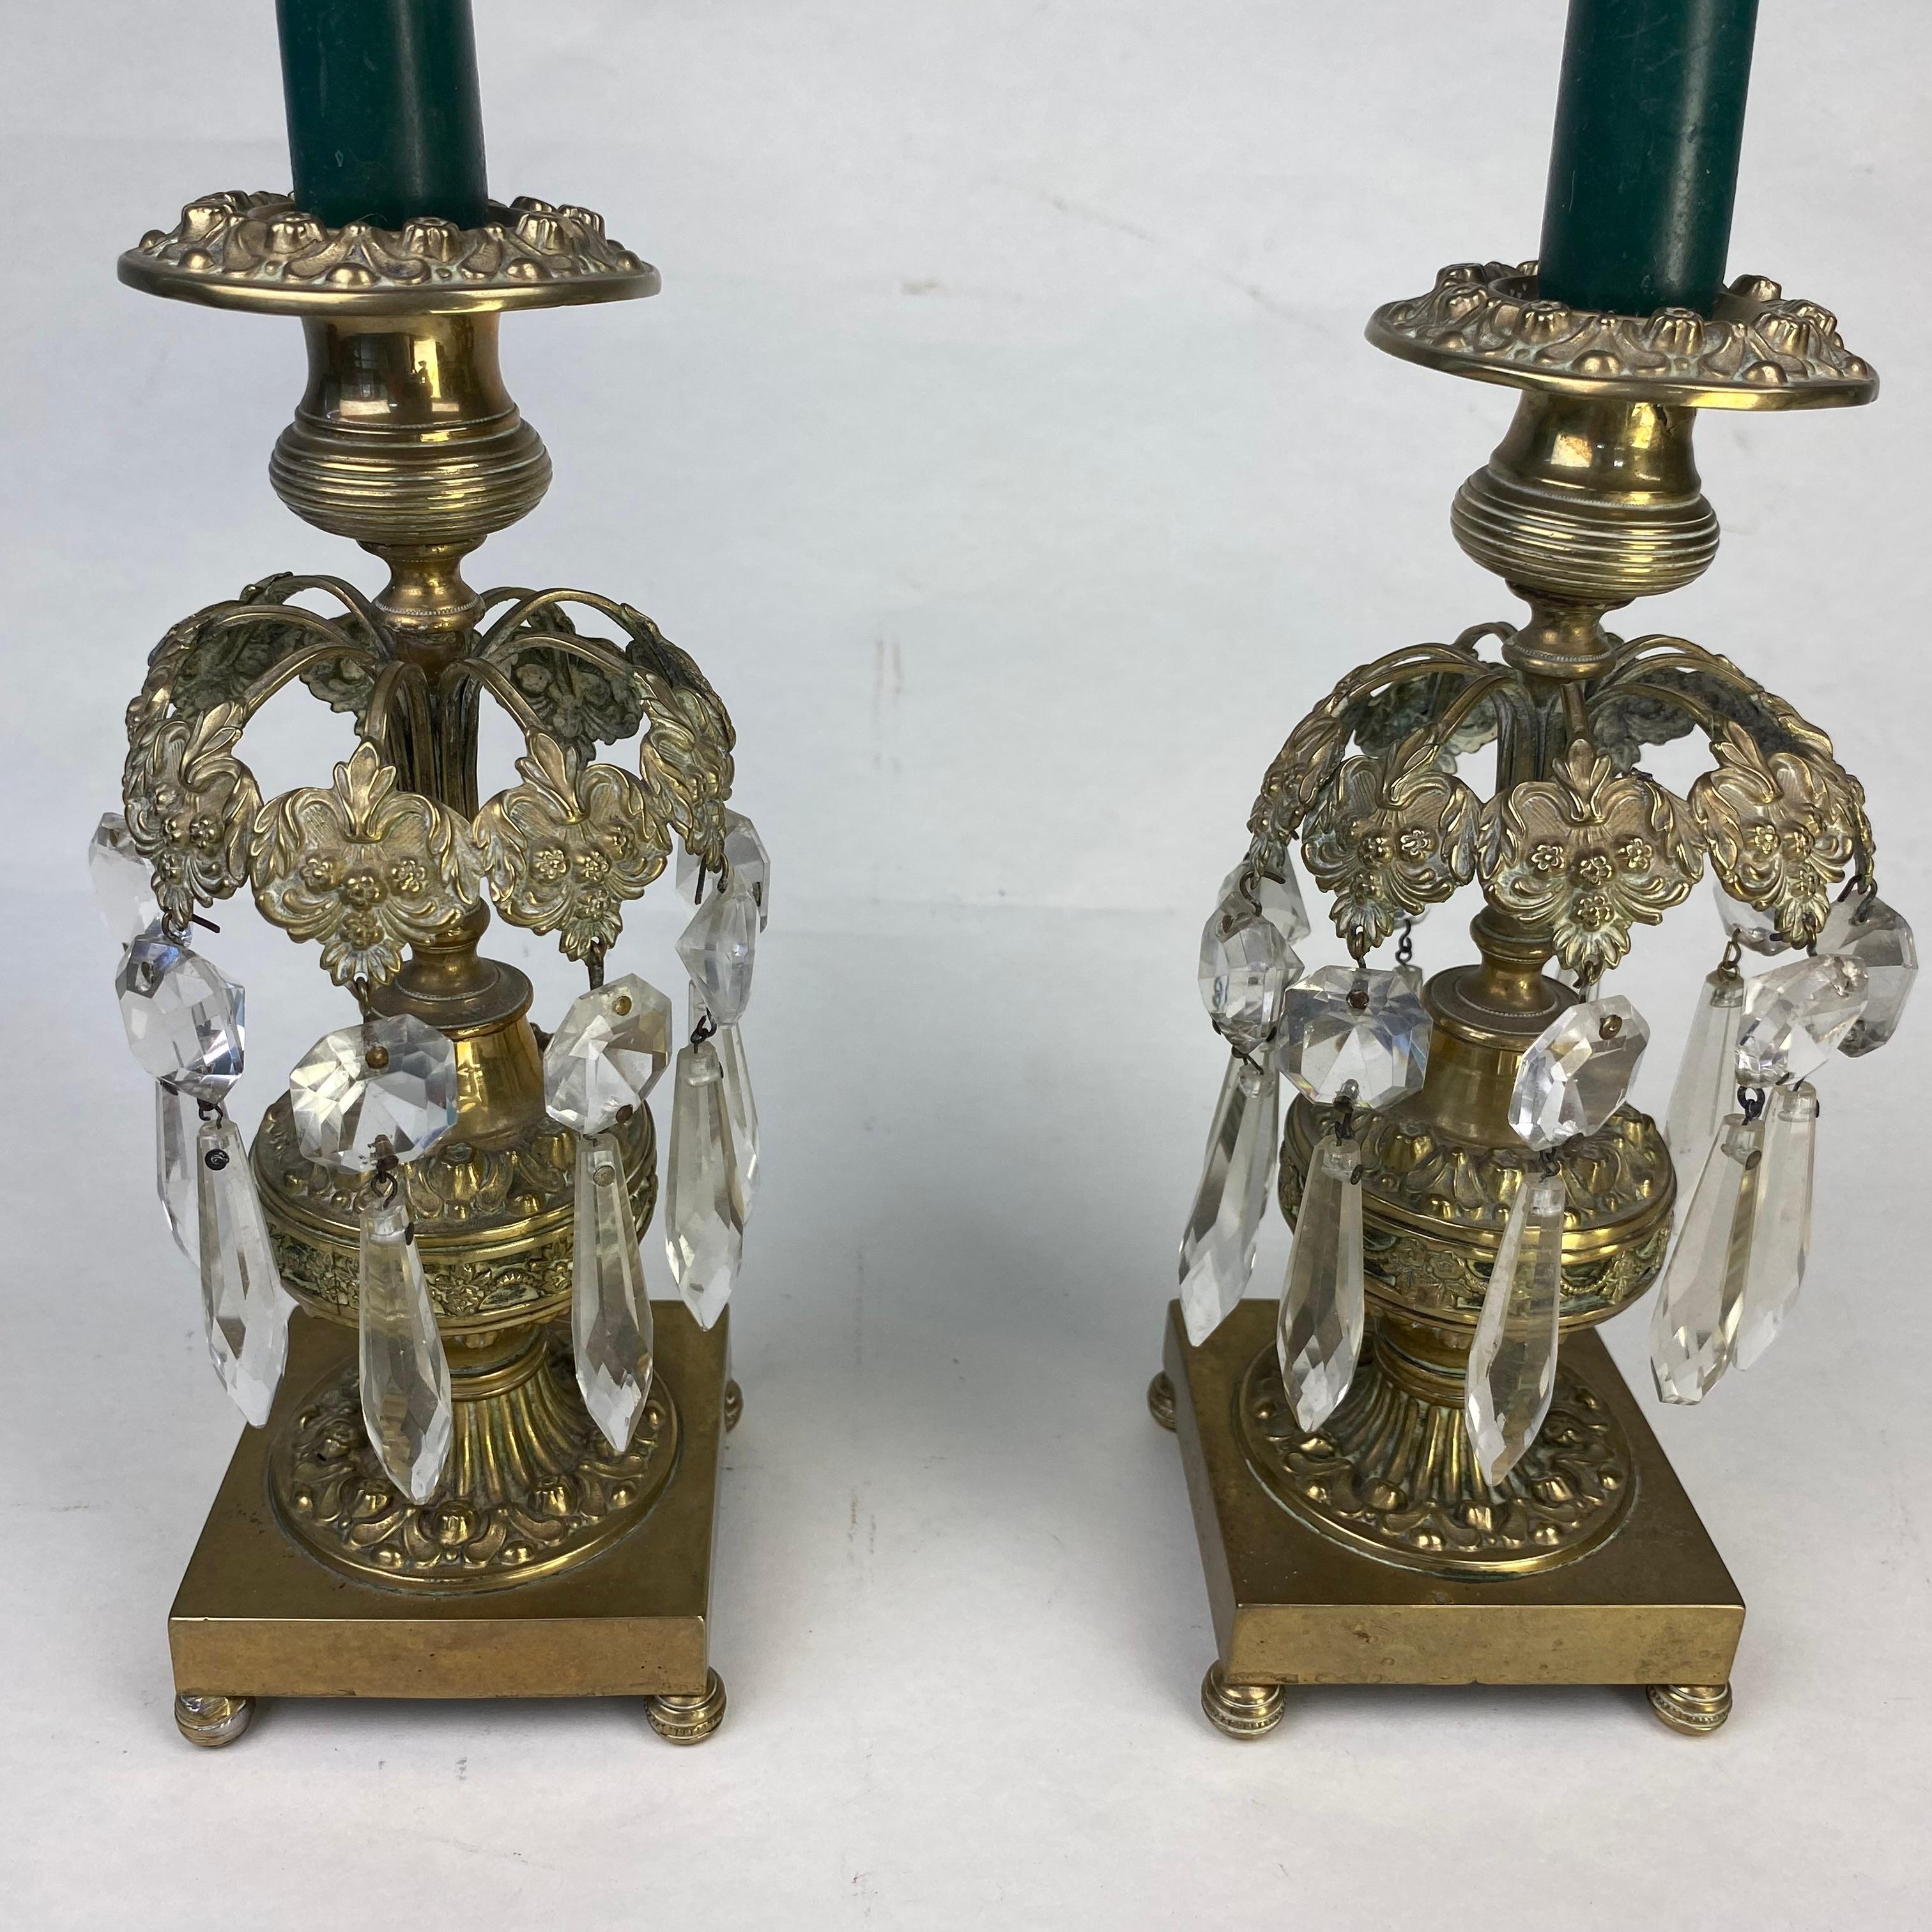 A good pair of gilt metal candleticks with prism-cut glass drops.  